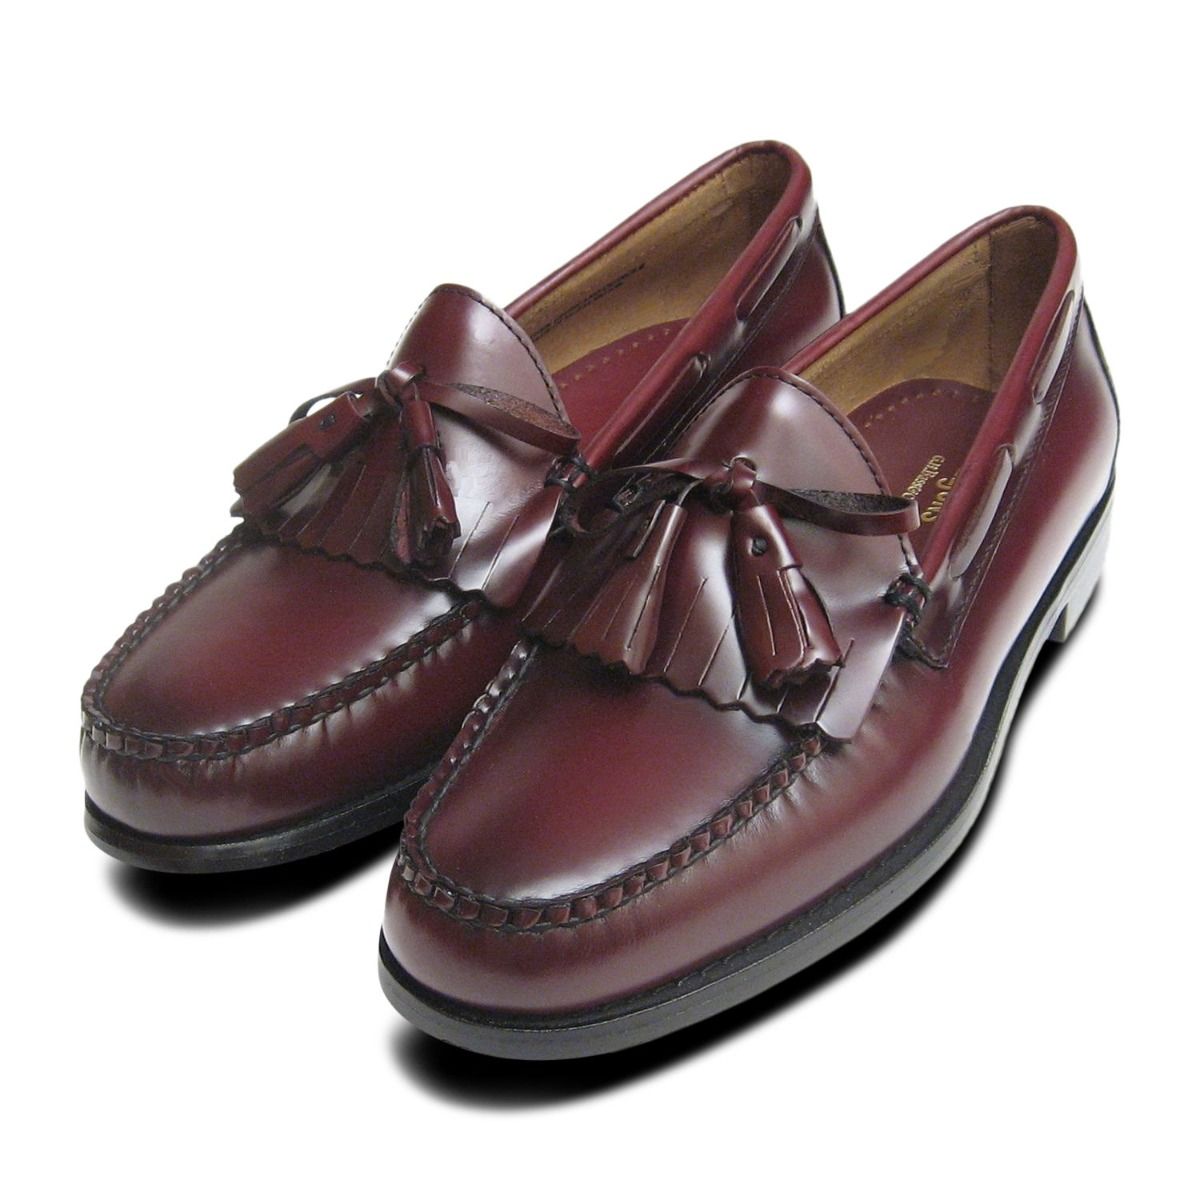 WD1 Patent leather loafers with fringes, burgundy Velenase red